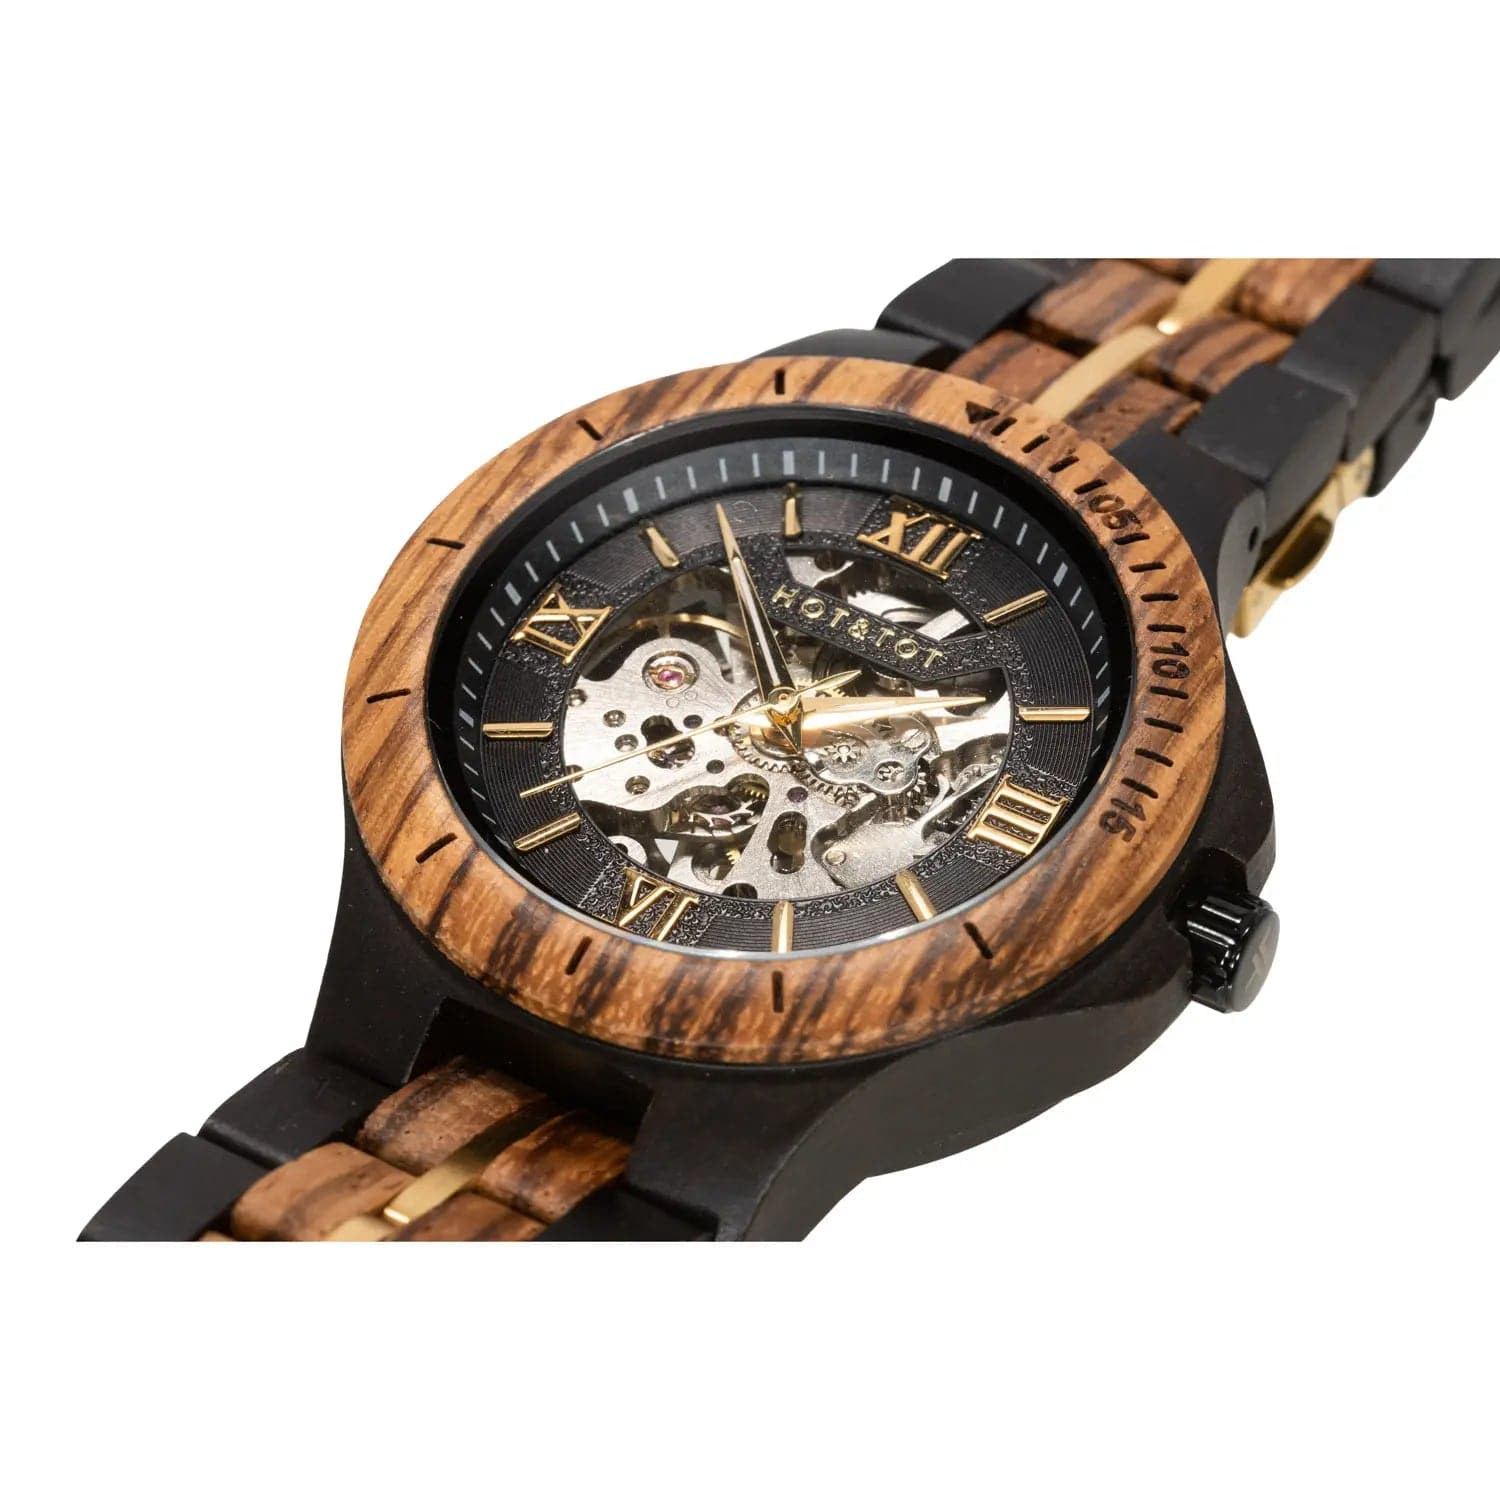 Gold Motus Automatic Watch from HOT&TOT-44mm, Zebra Wood - Minutes Hours Days Watch Emporium 